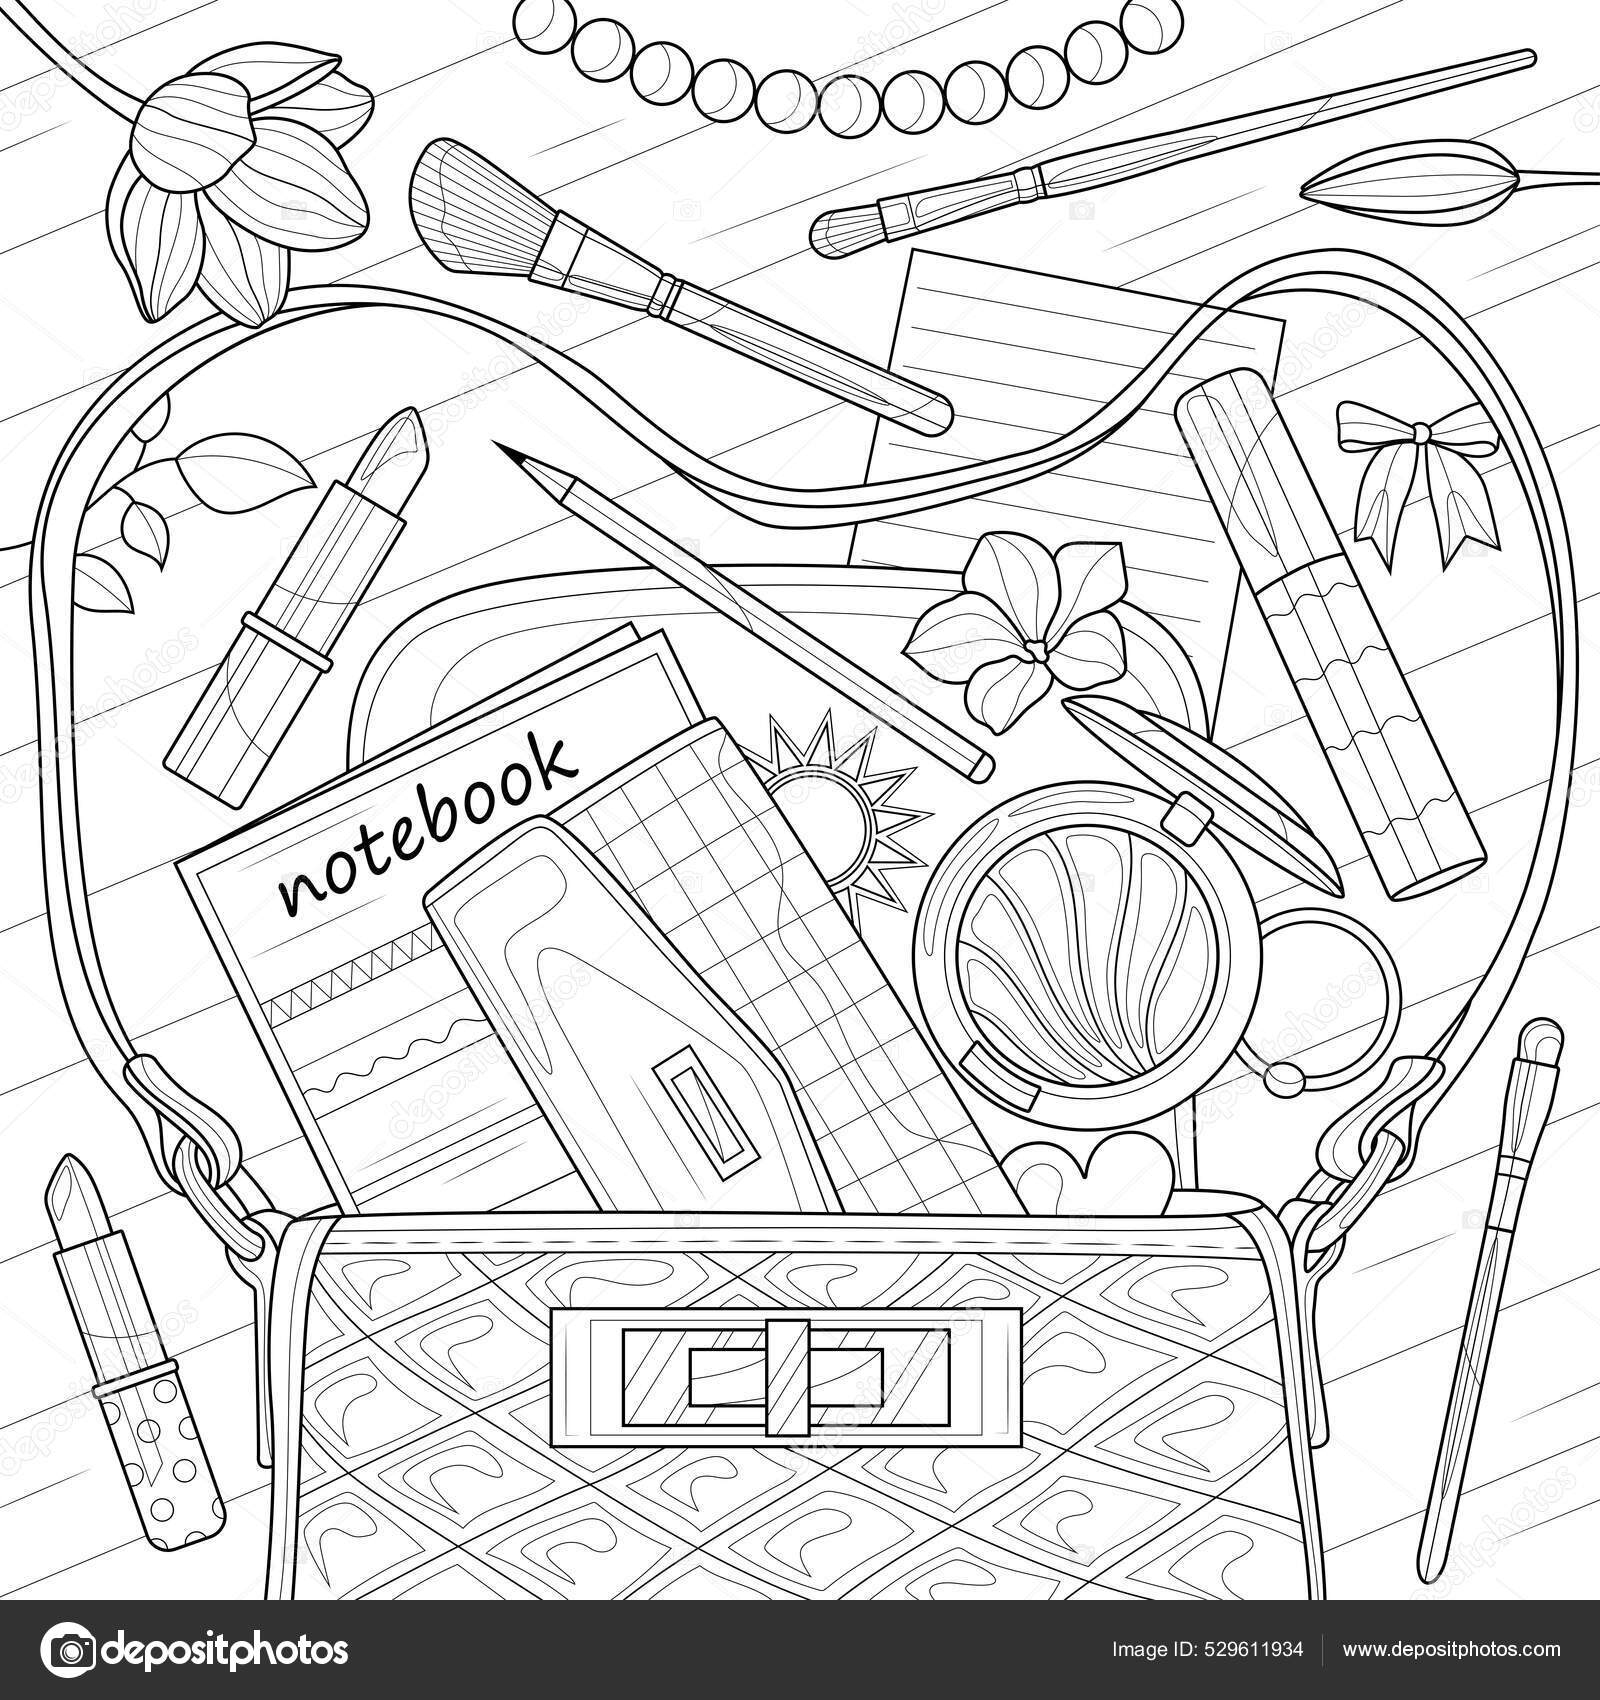 Background Coloring Supplies for Adult Coloring Books